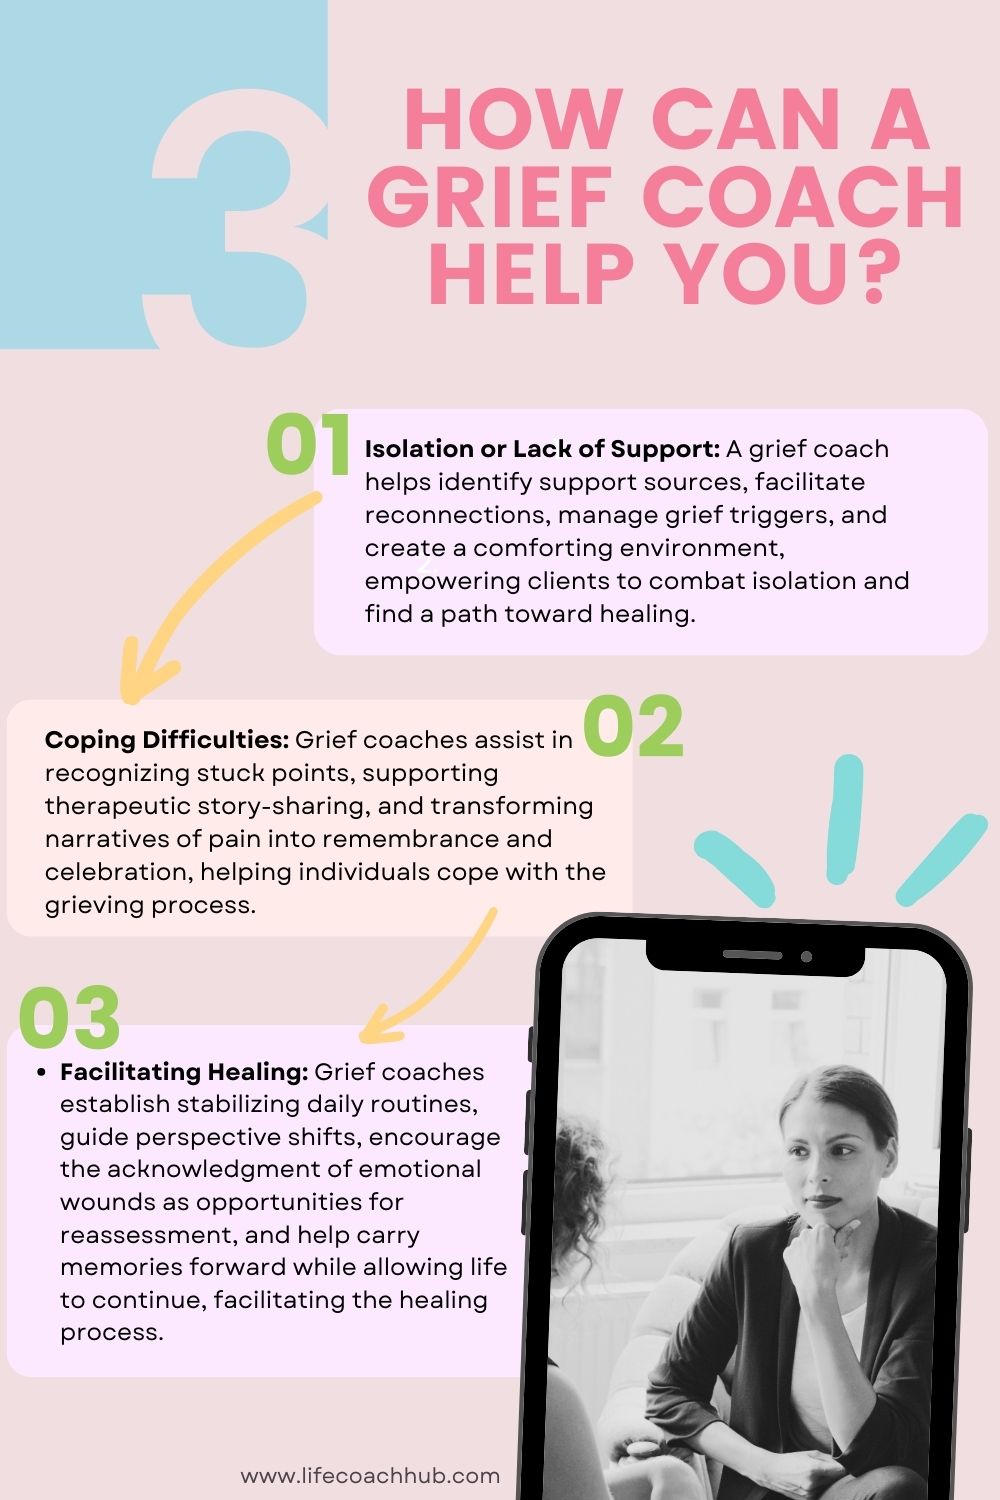 How can a grief coach help you?